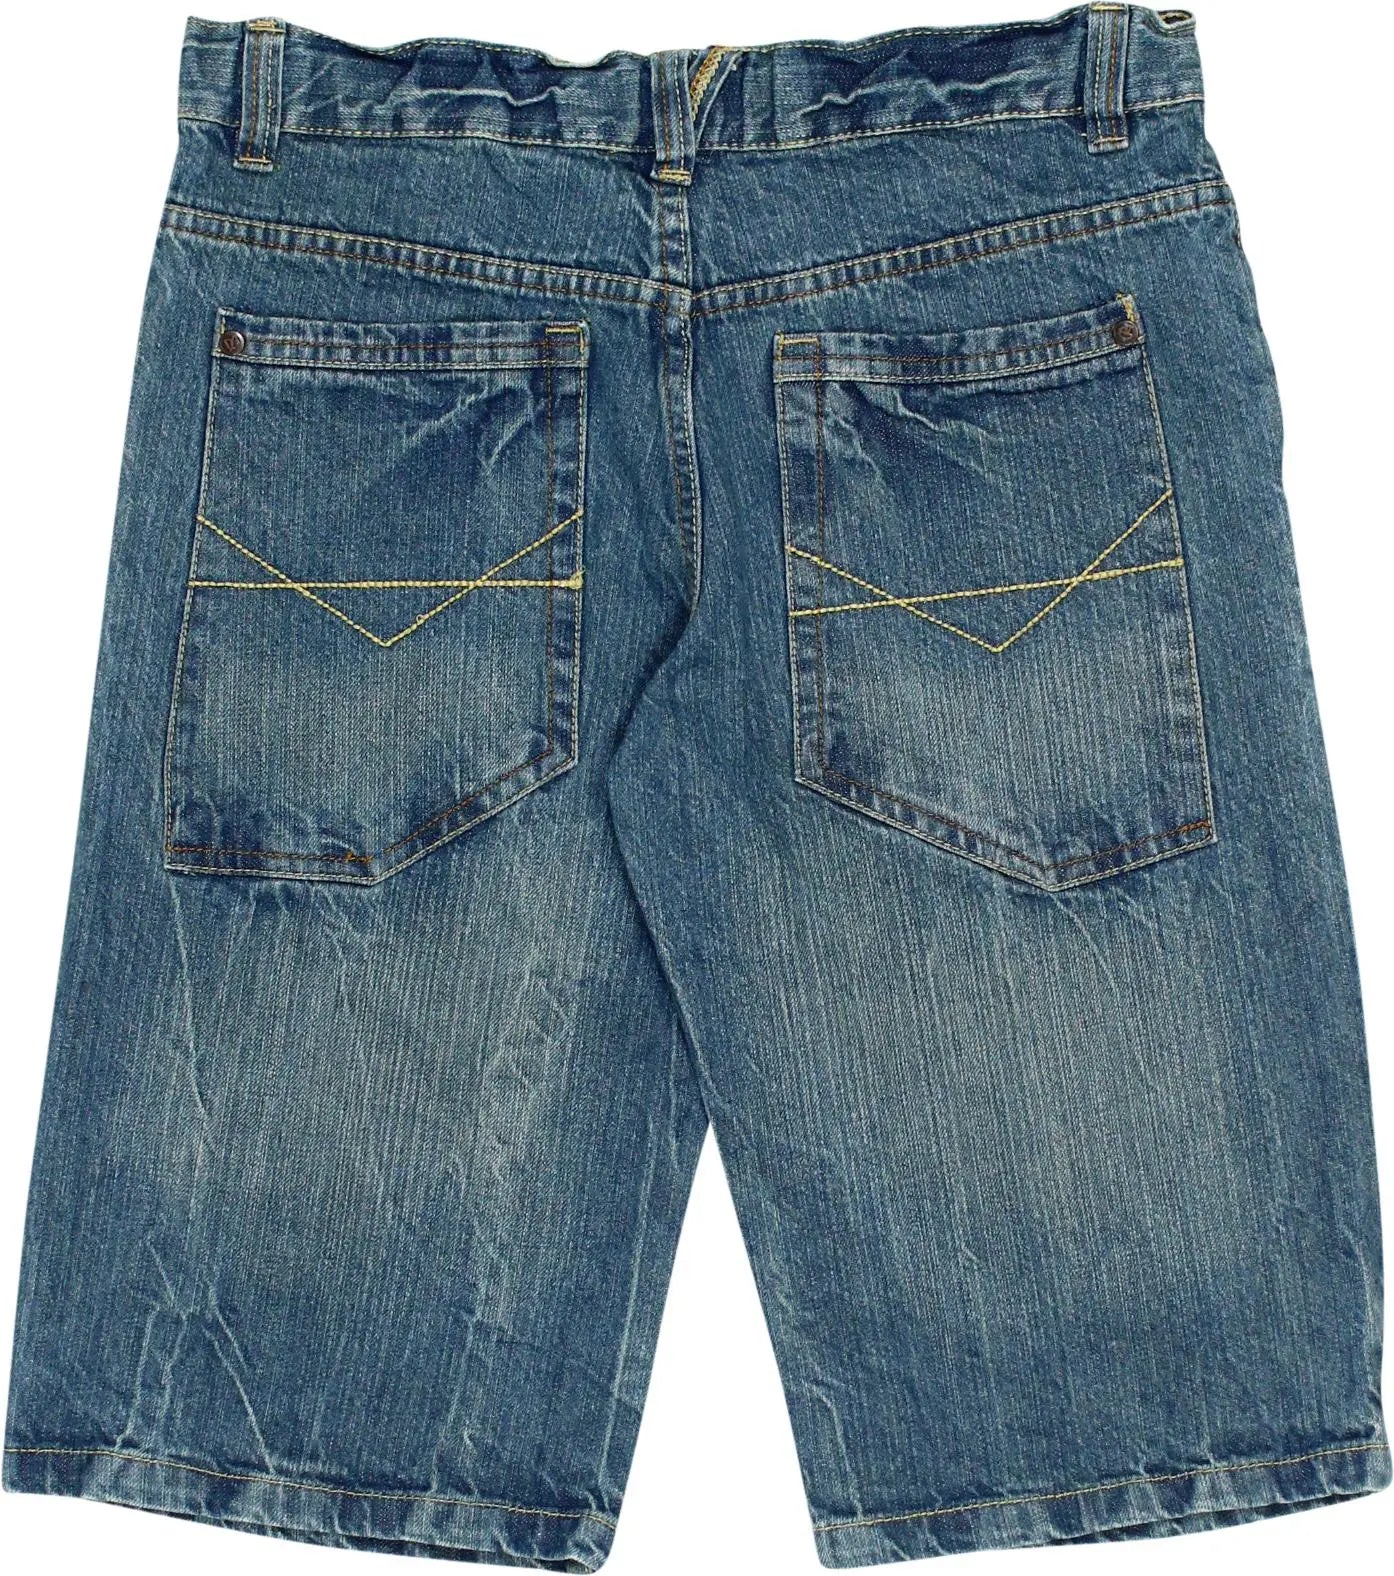 Scamps & Boys - Blue Denim Shorts- ThriftTale.com - Vintage and second handclothing